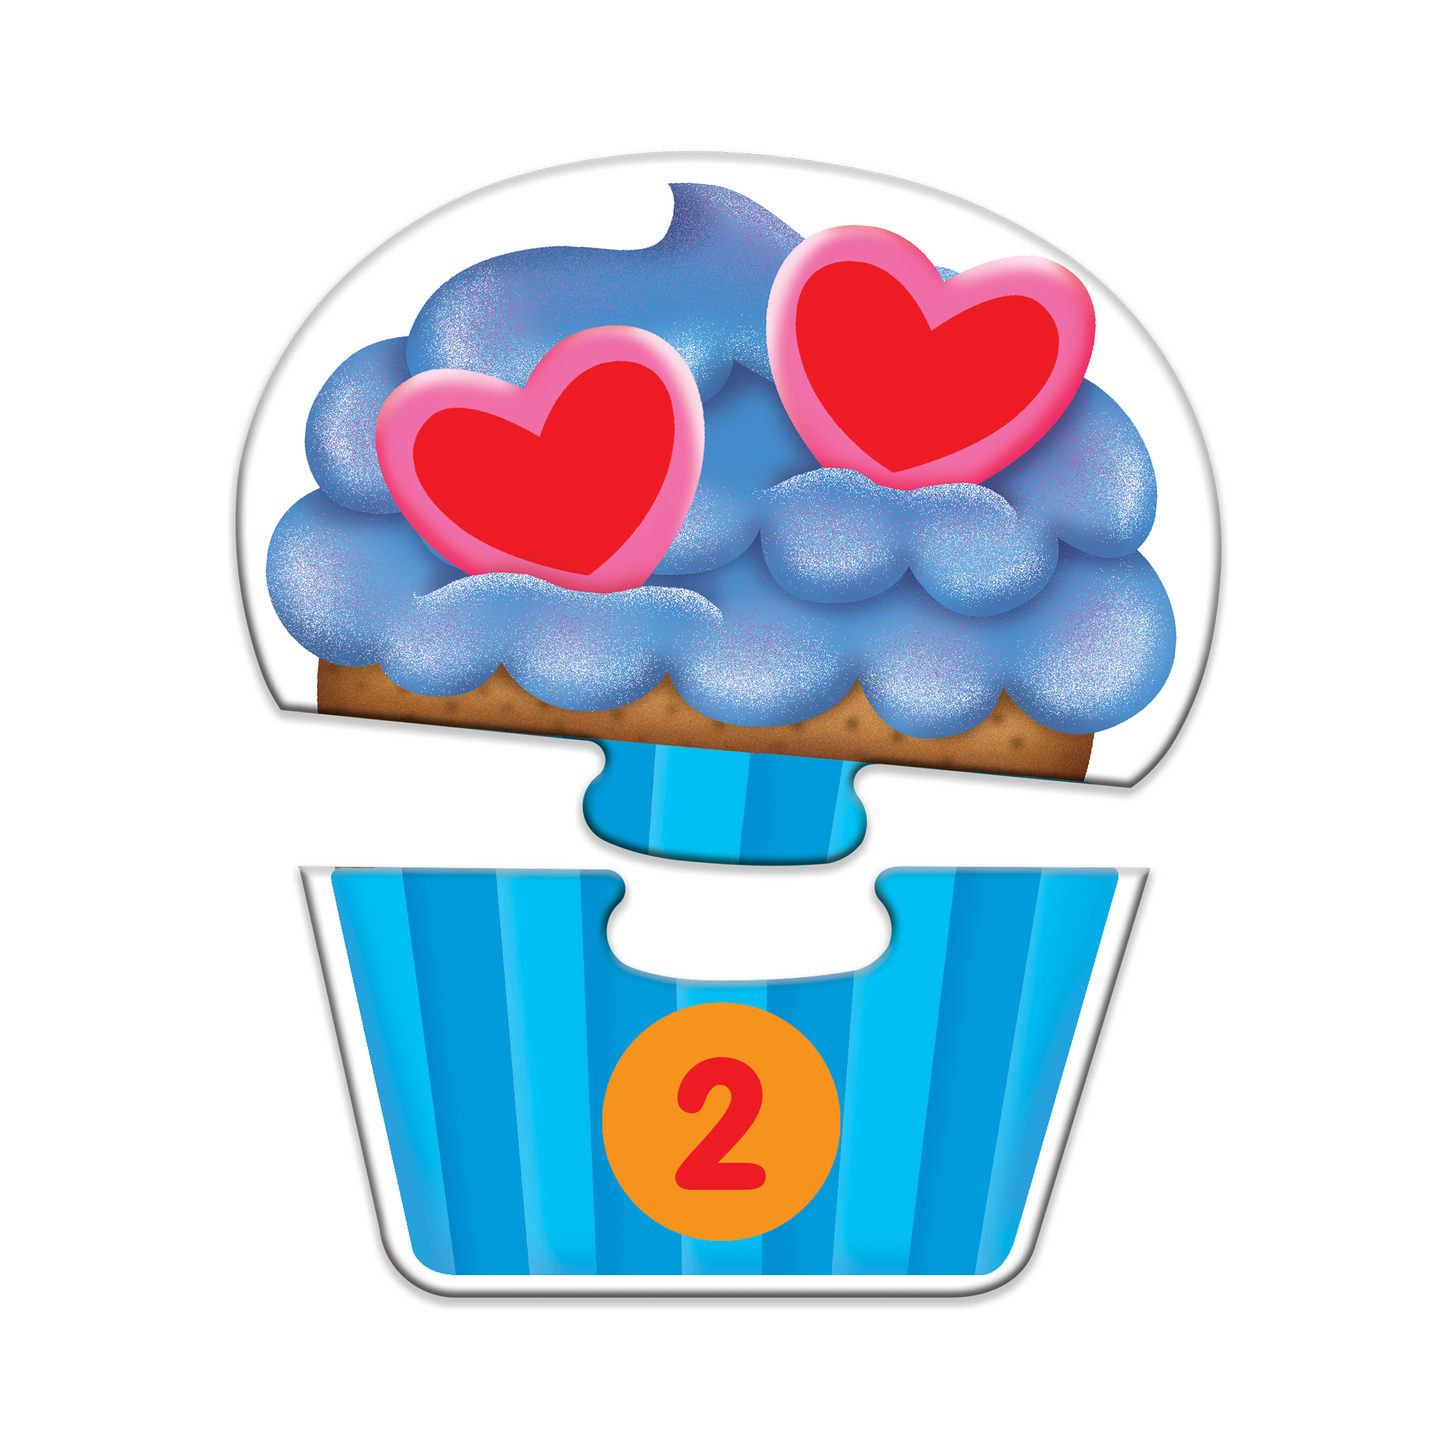 My First Match It! Counting Cupcakes  | Counting Puzzle | Jigsaw Puzzle For Kids